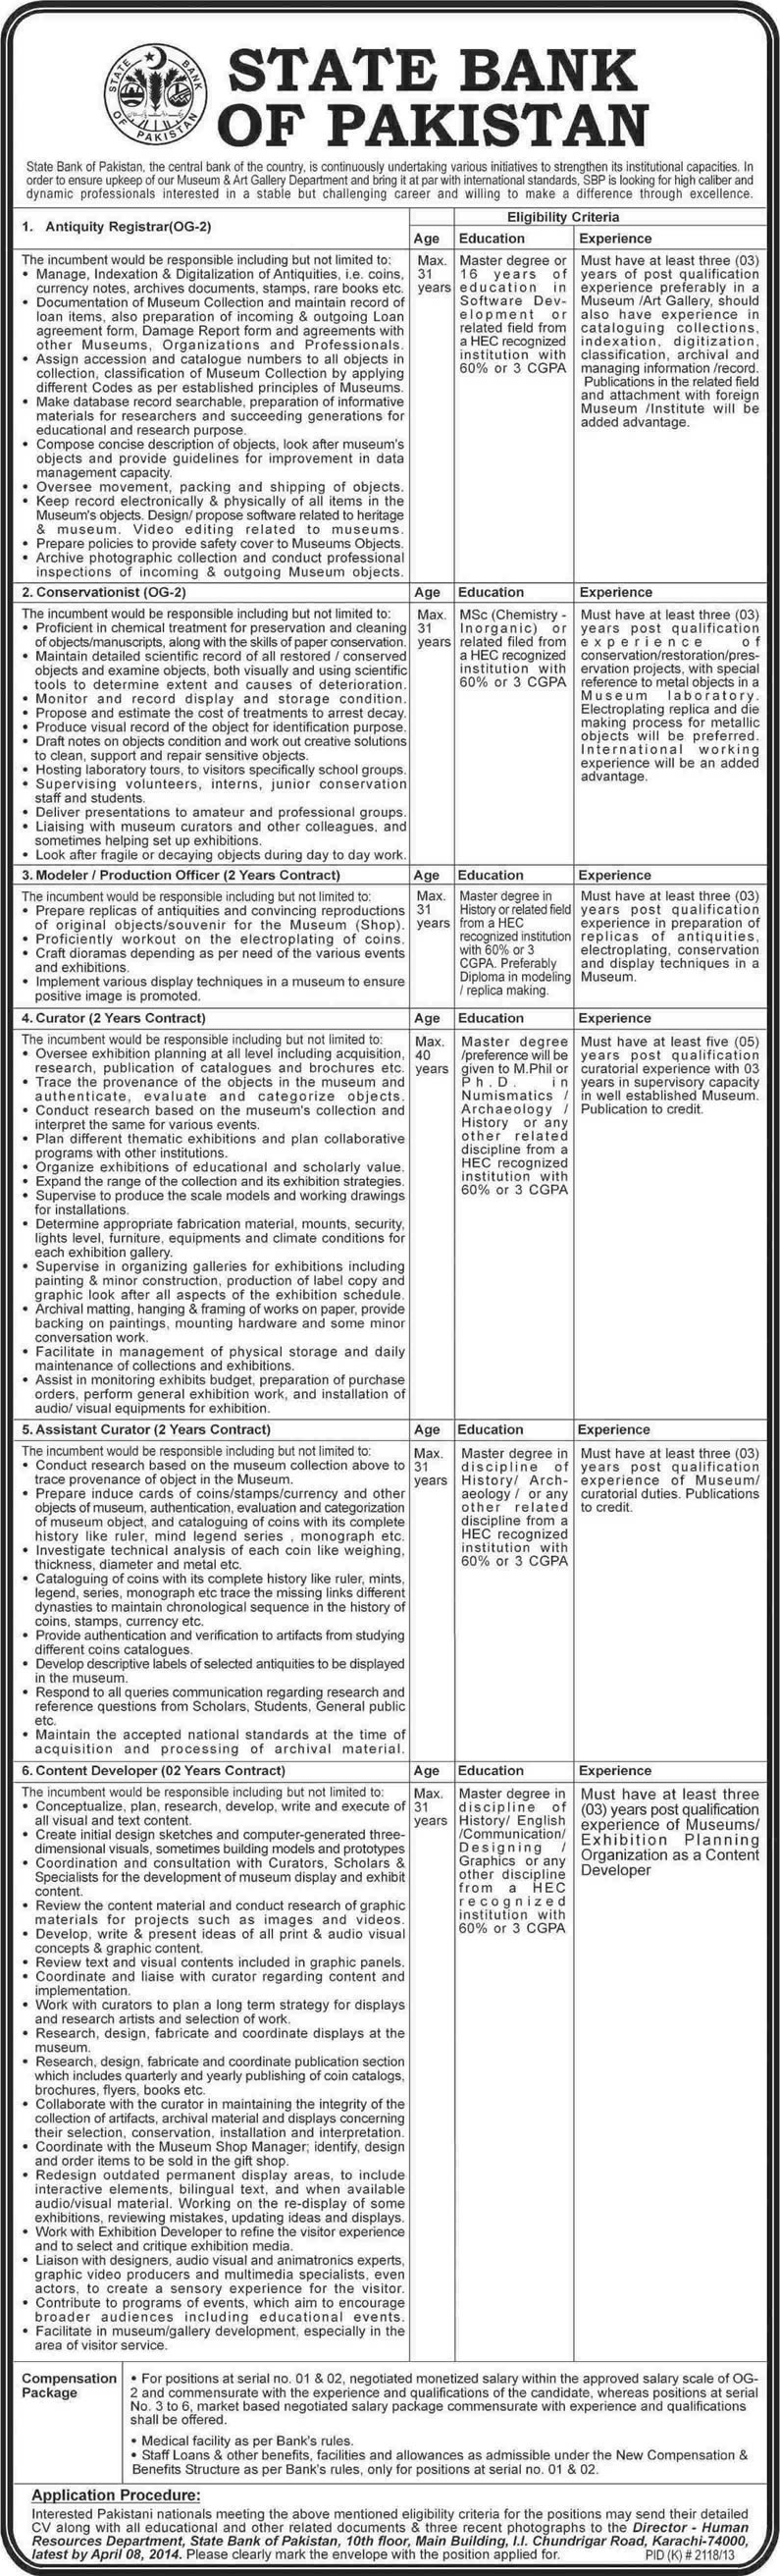 State Bank of Pakistan Jobs 2014 March Latest Advertisement